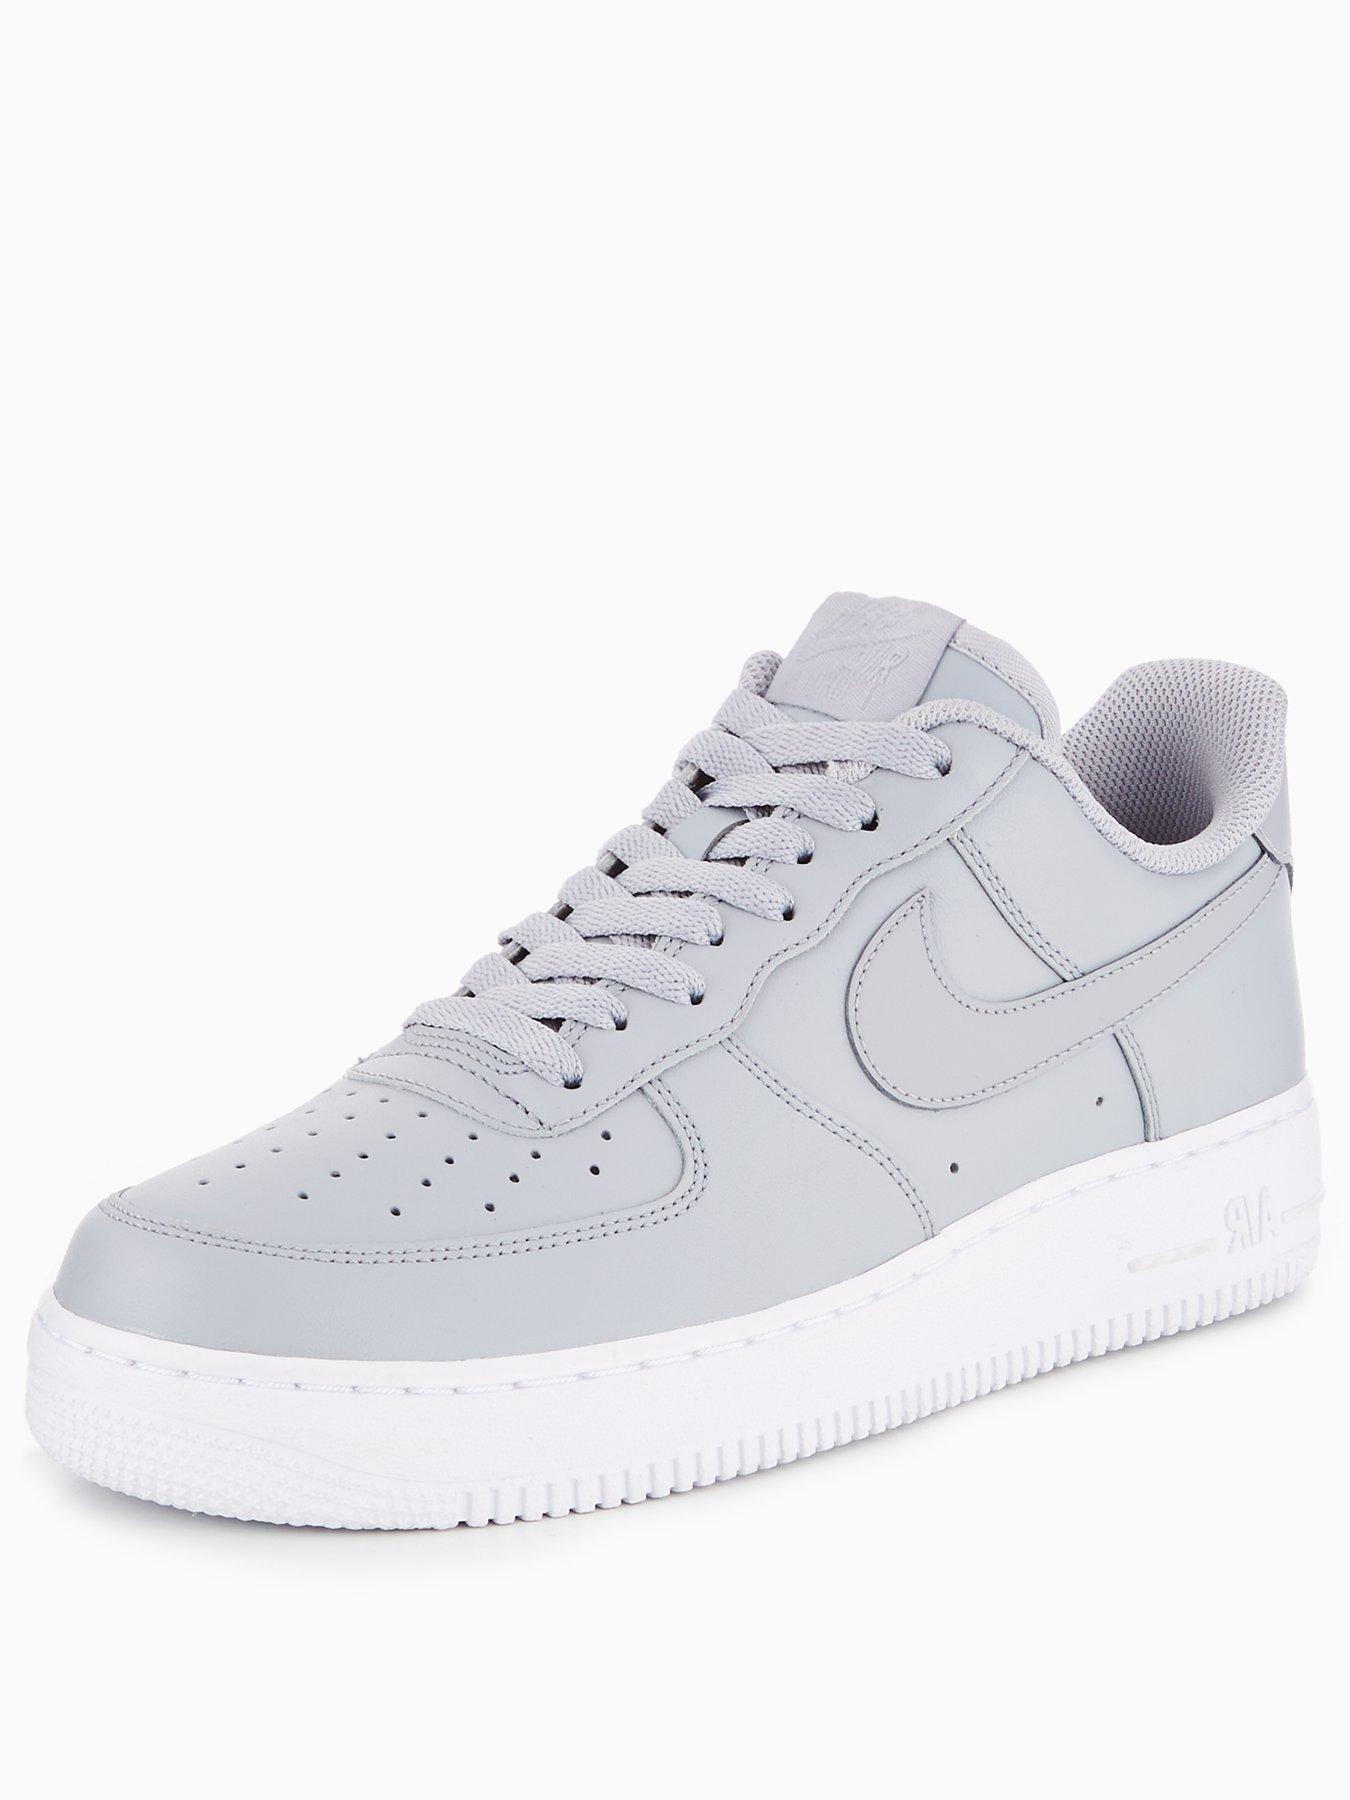 grey and white af1